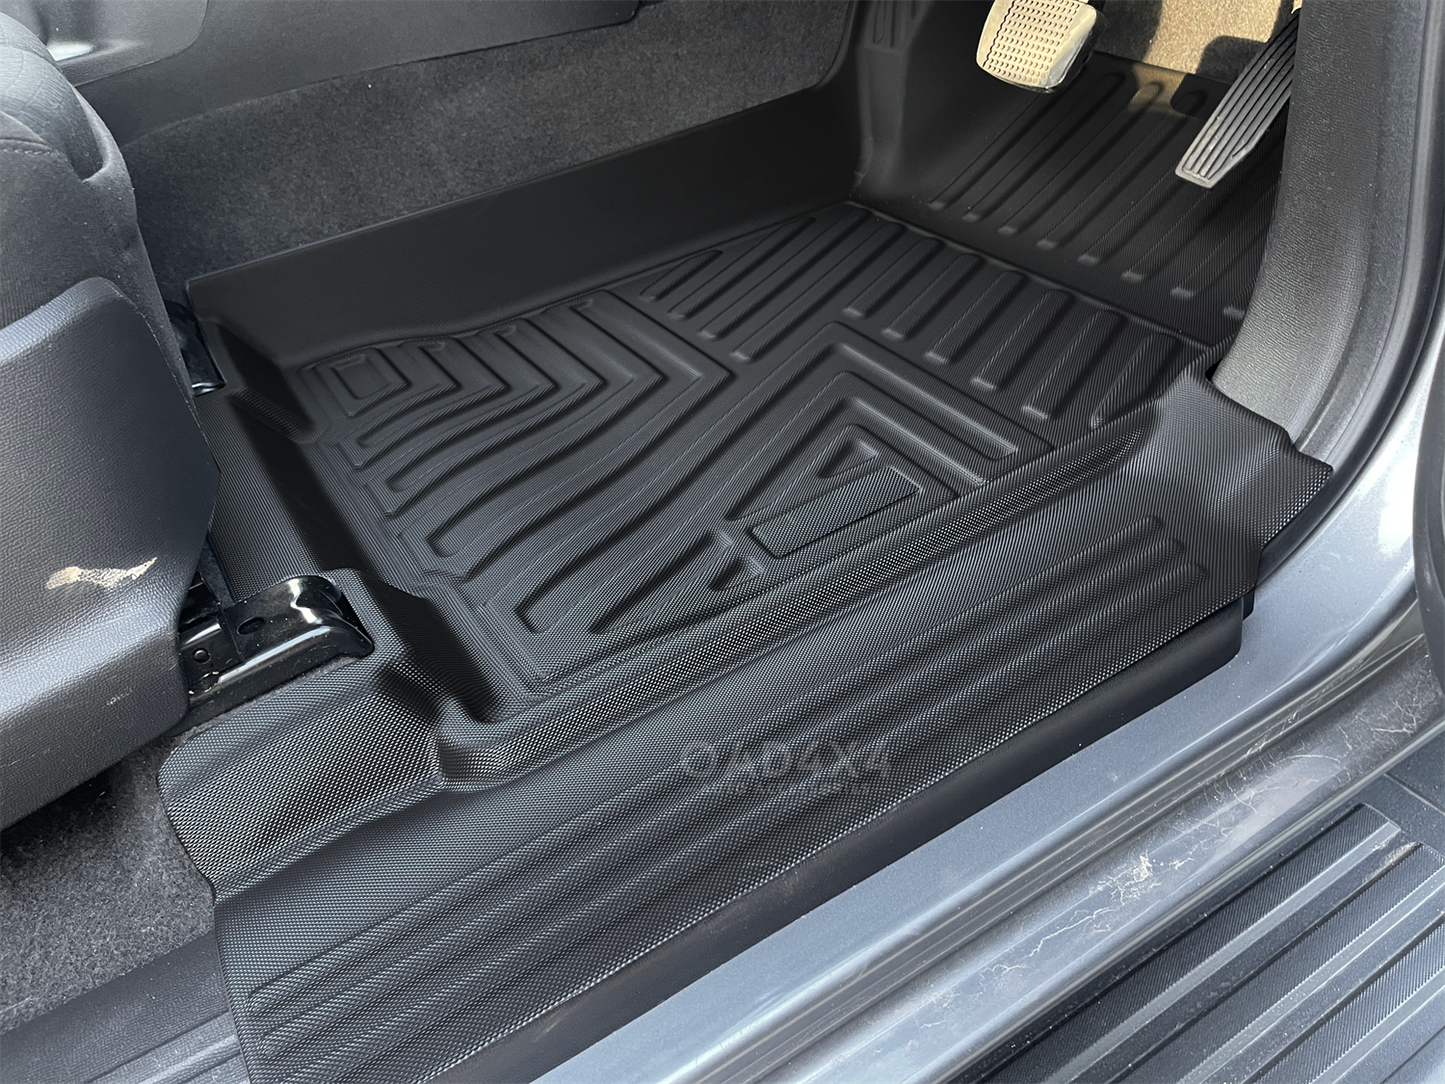 Floor Mats for Holden Colorado RG Single / Extra Cab 2012-Onwards Tailored TPE 5D Door Sill Covered Car Floor Mat Liner